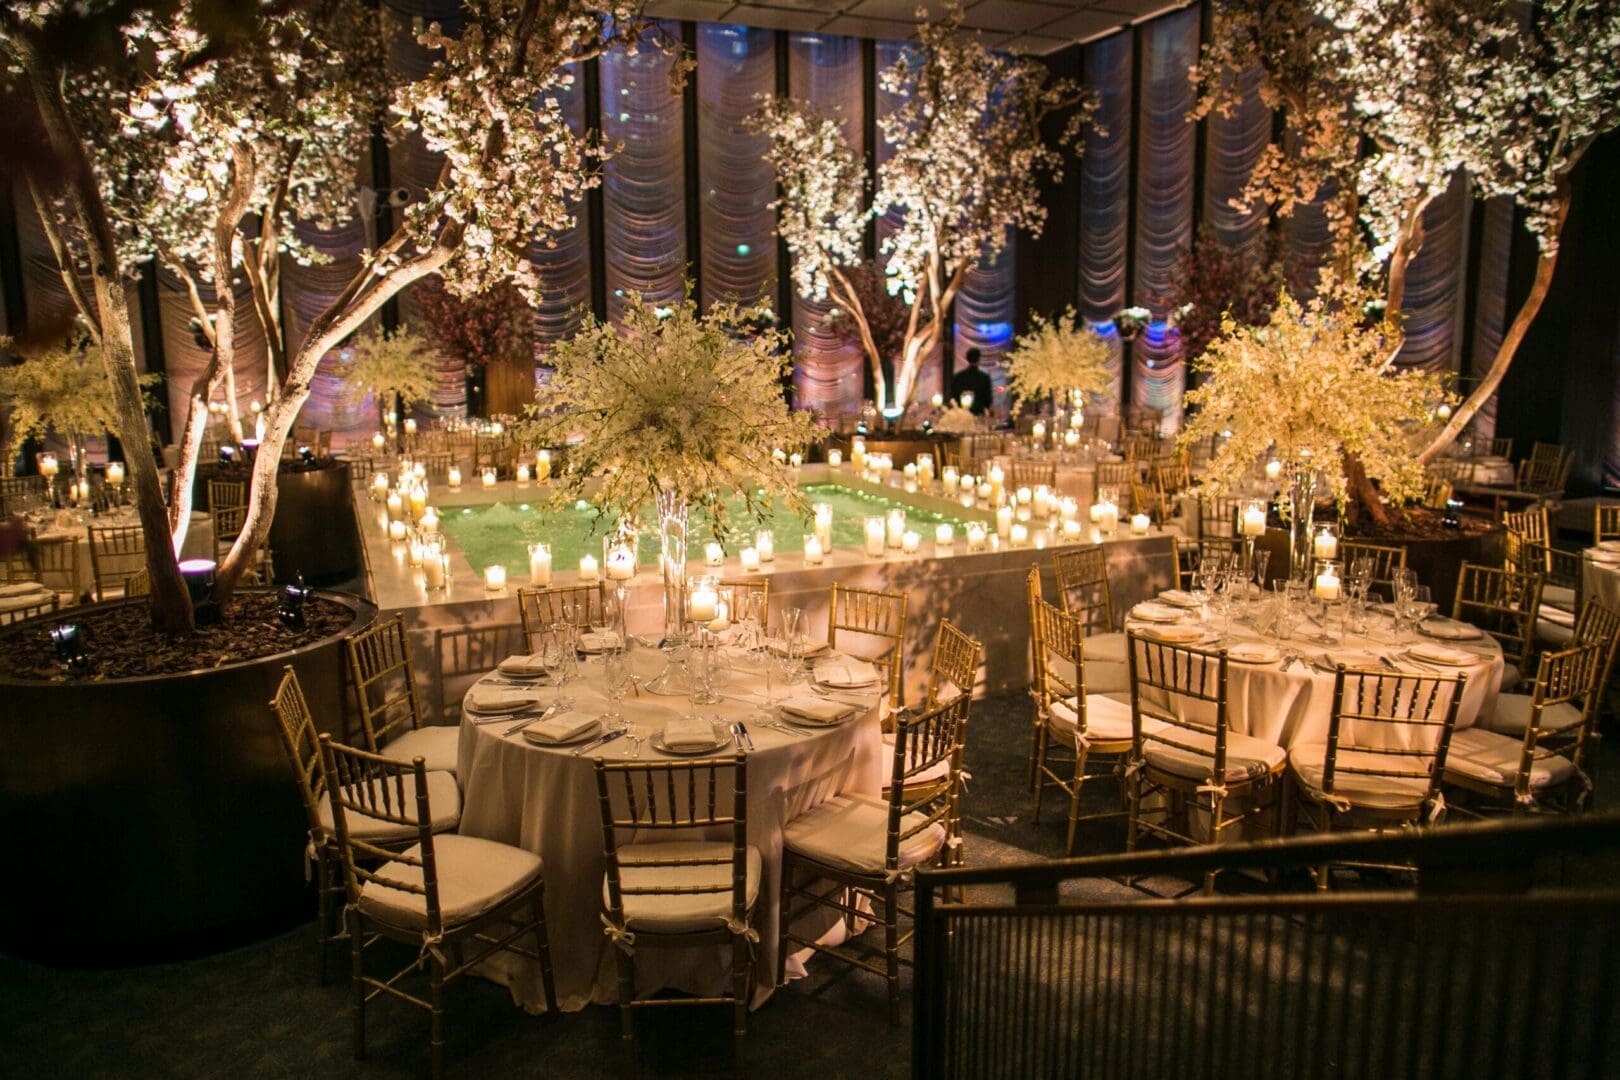 A wedding reception set up with tables and candles.